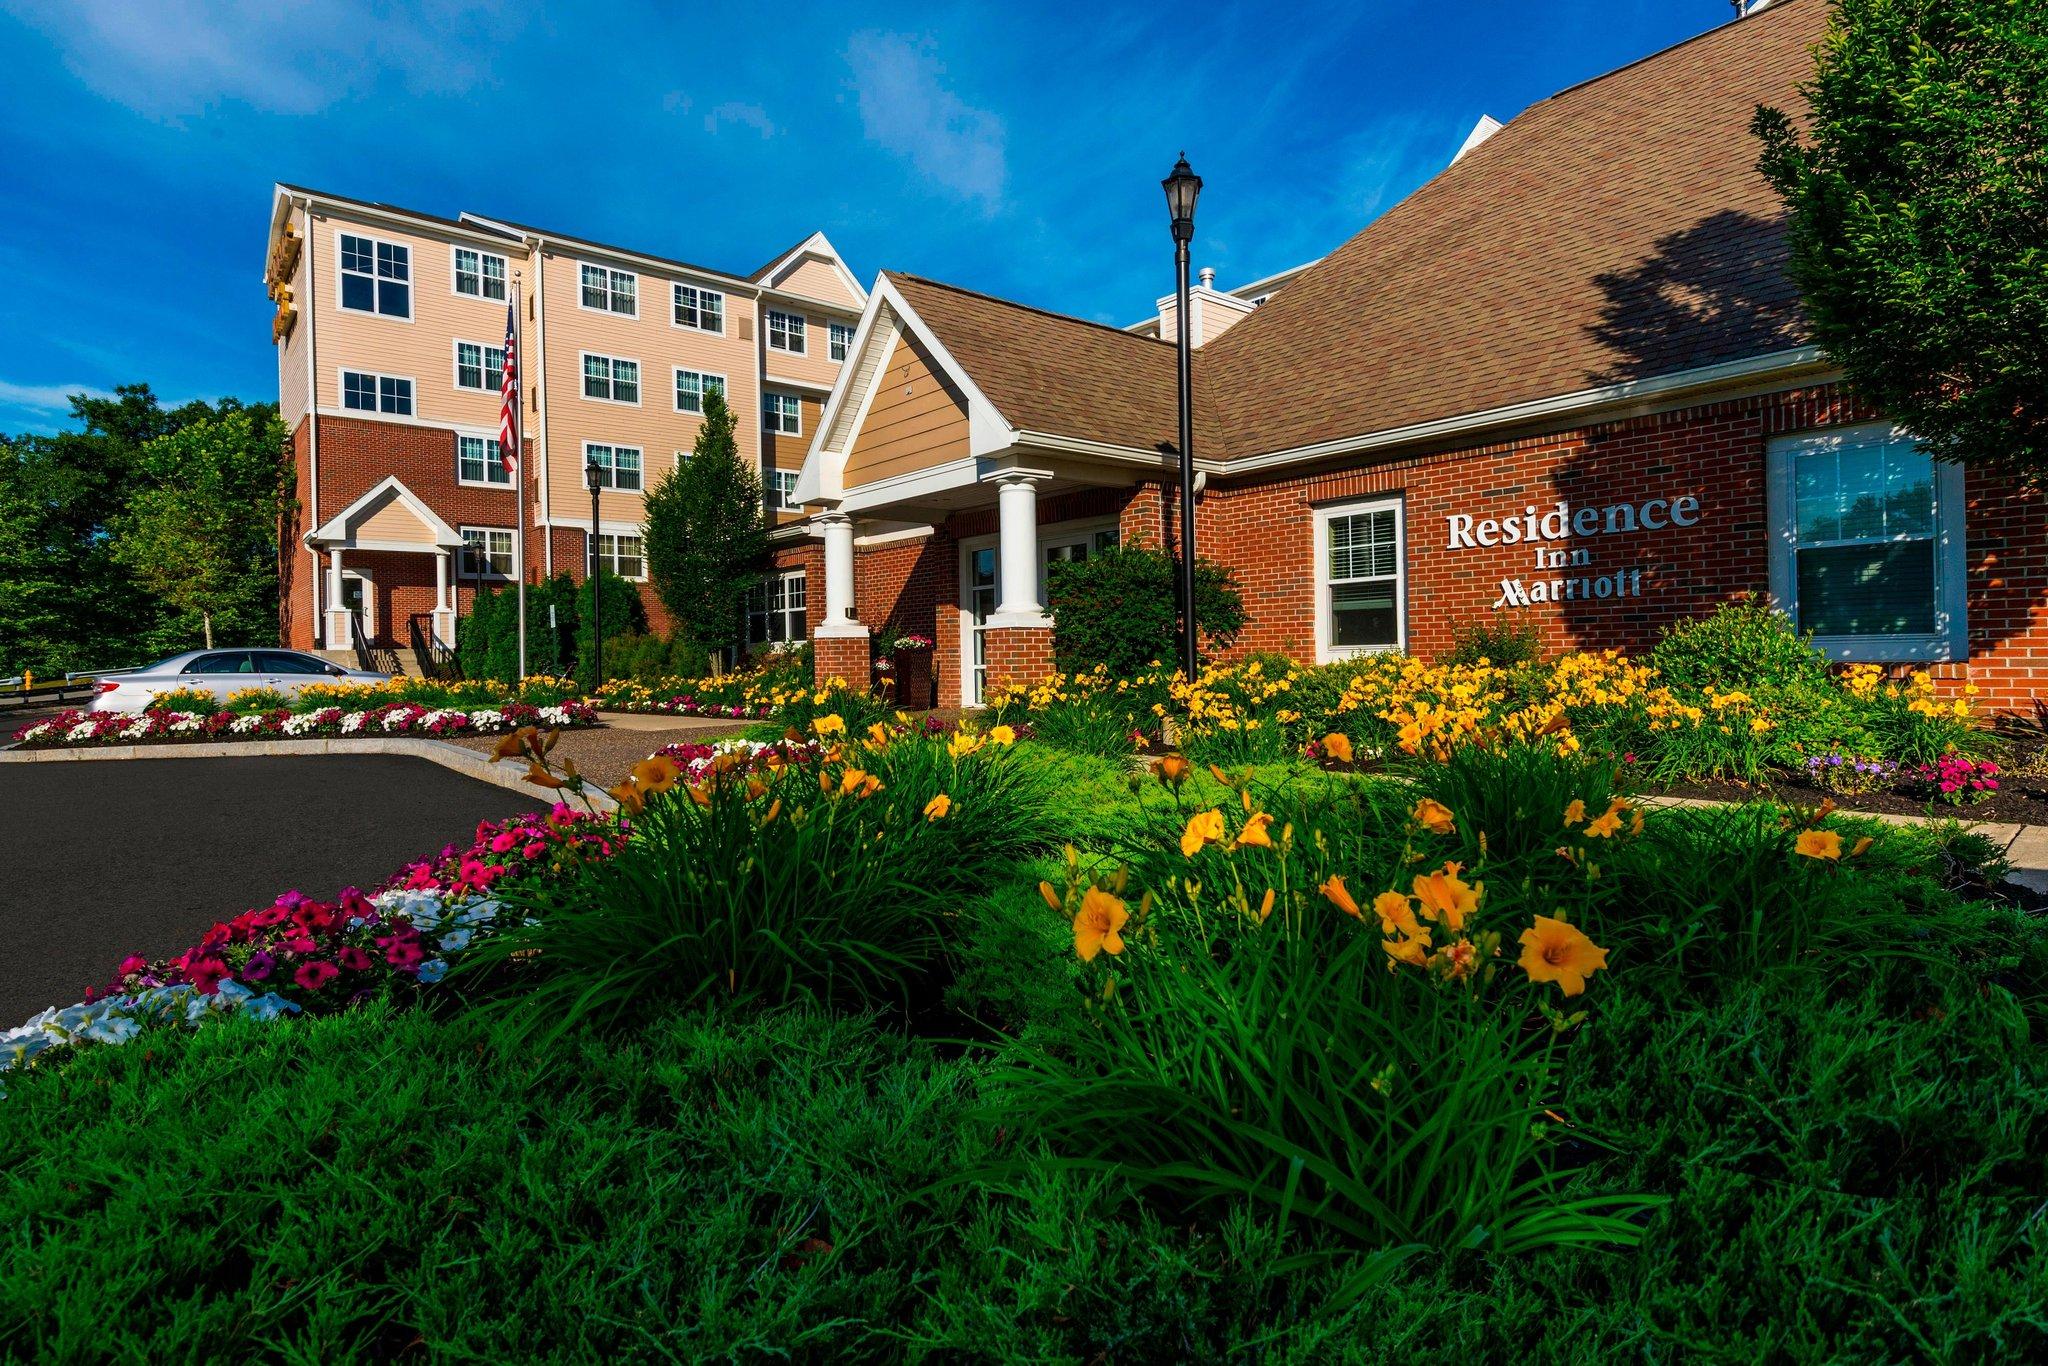 Residence Inn Worcester in Worcester, MA